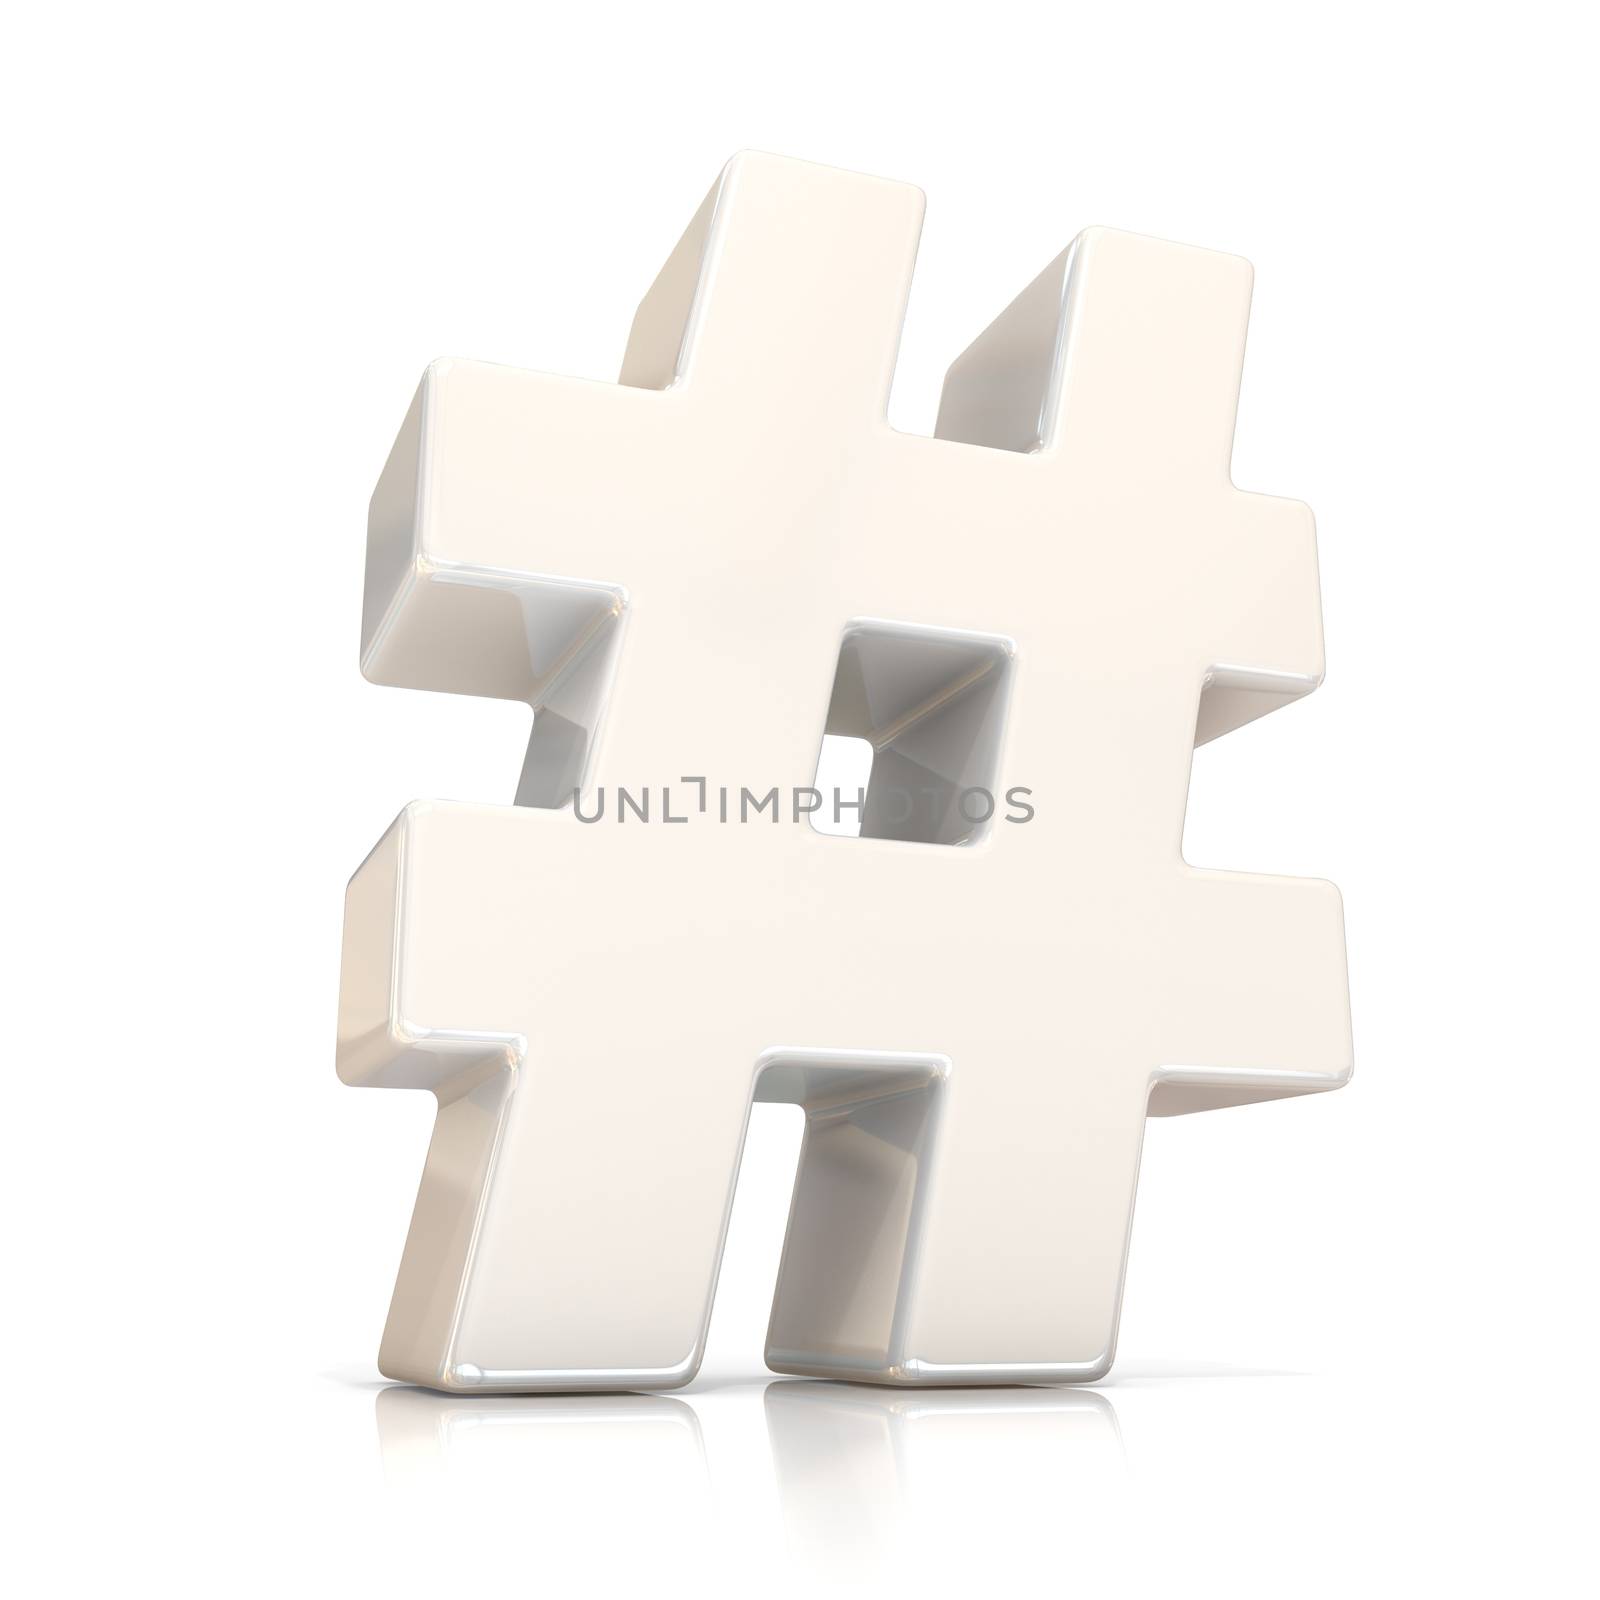 Hashtag, number mark 3D white sign isolated on white background